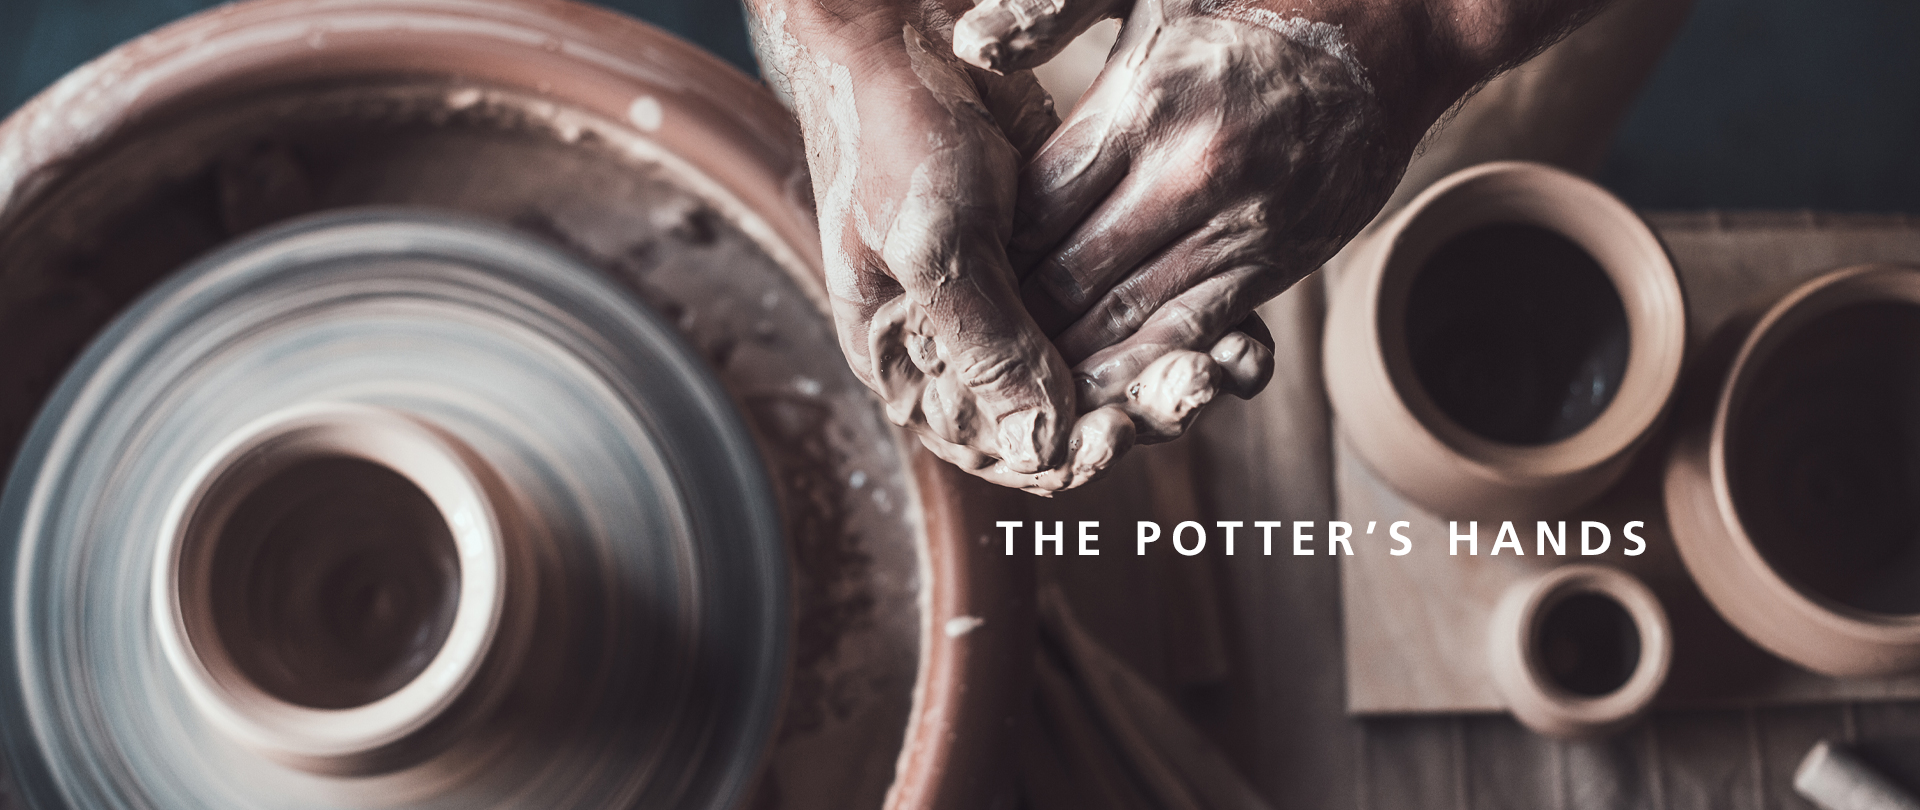 The Potter's Hands
Recovery in Christ
Mondays, 6:30 PM
